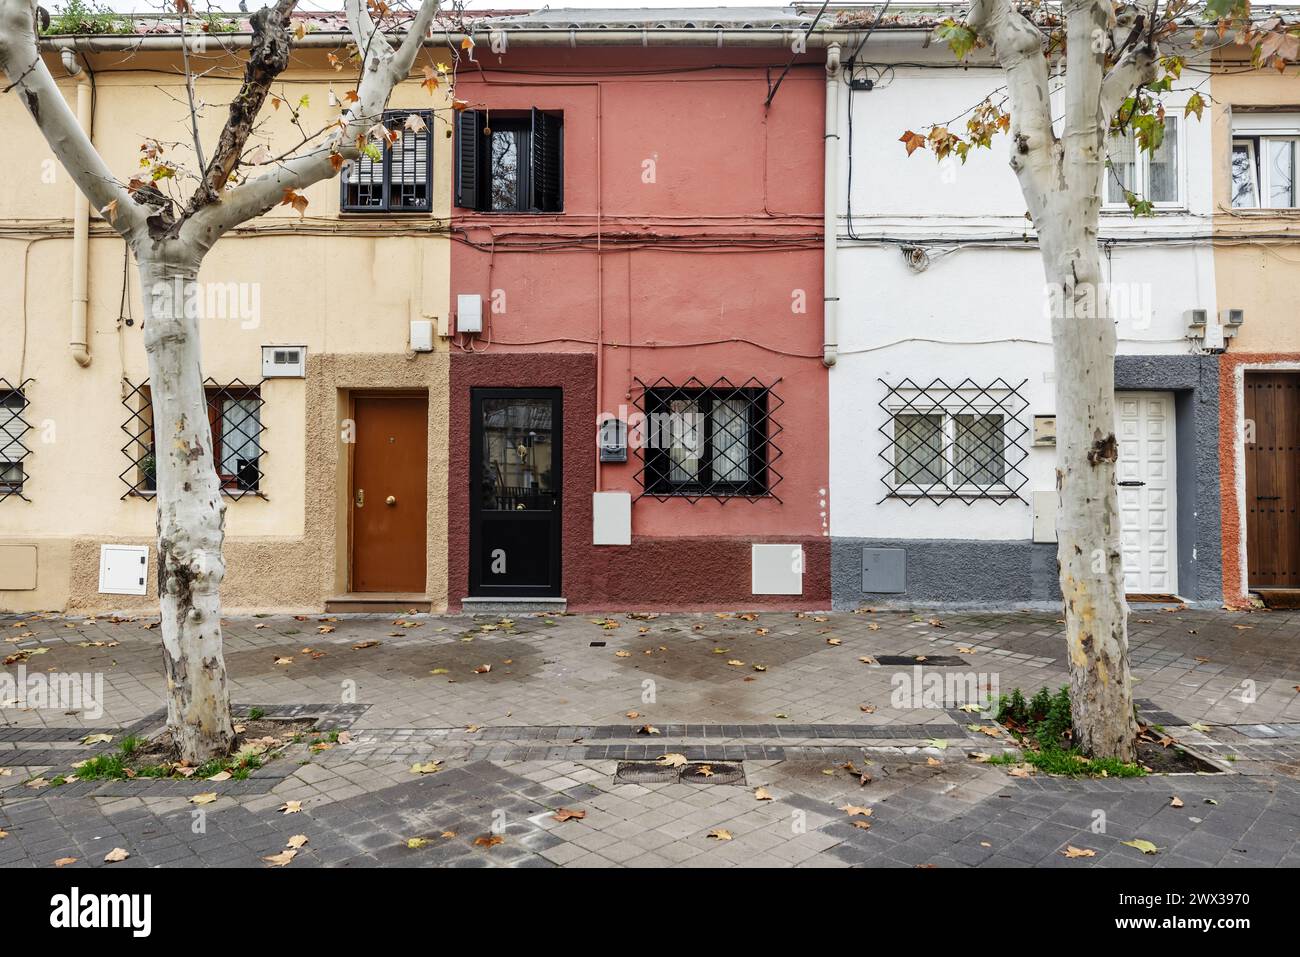 Facades of old houses of various colors of two heights with metal bars on the windows and trees with tree pits on the street Stock Photo